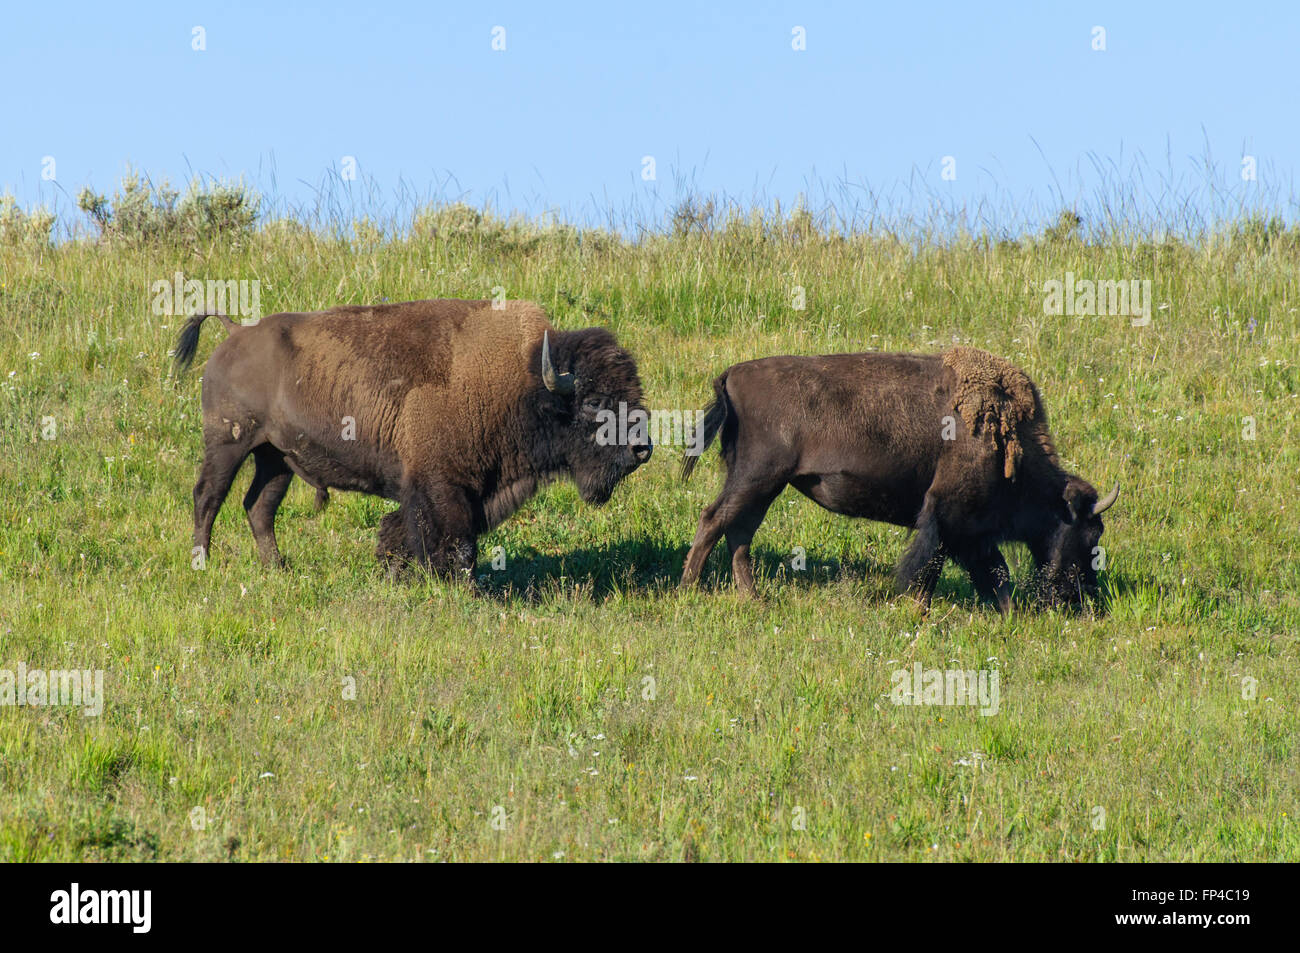 Bison Bison: Two bison mating in Yellowstone National Park Stock Photo